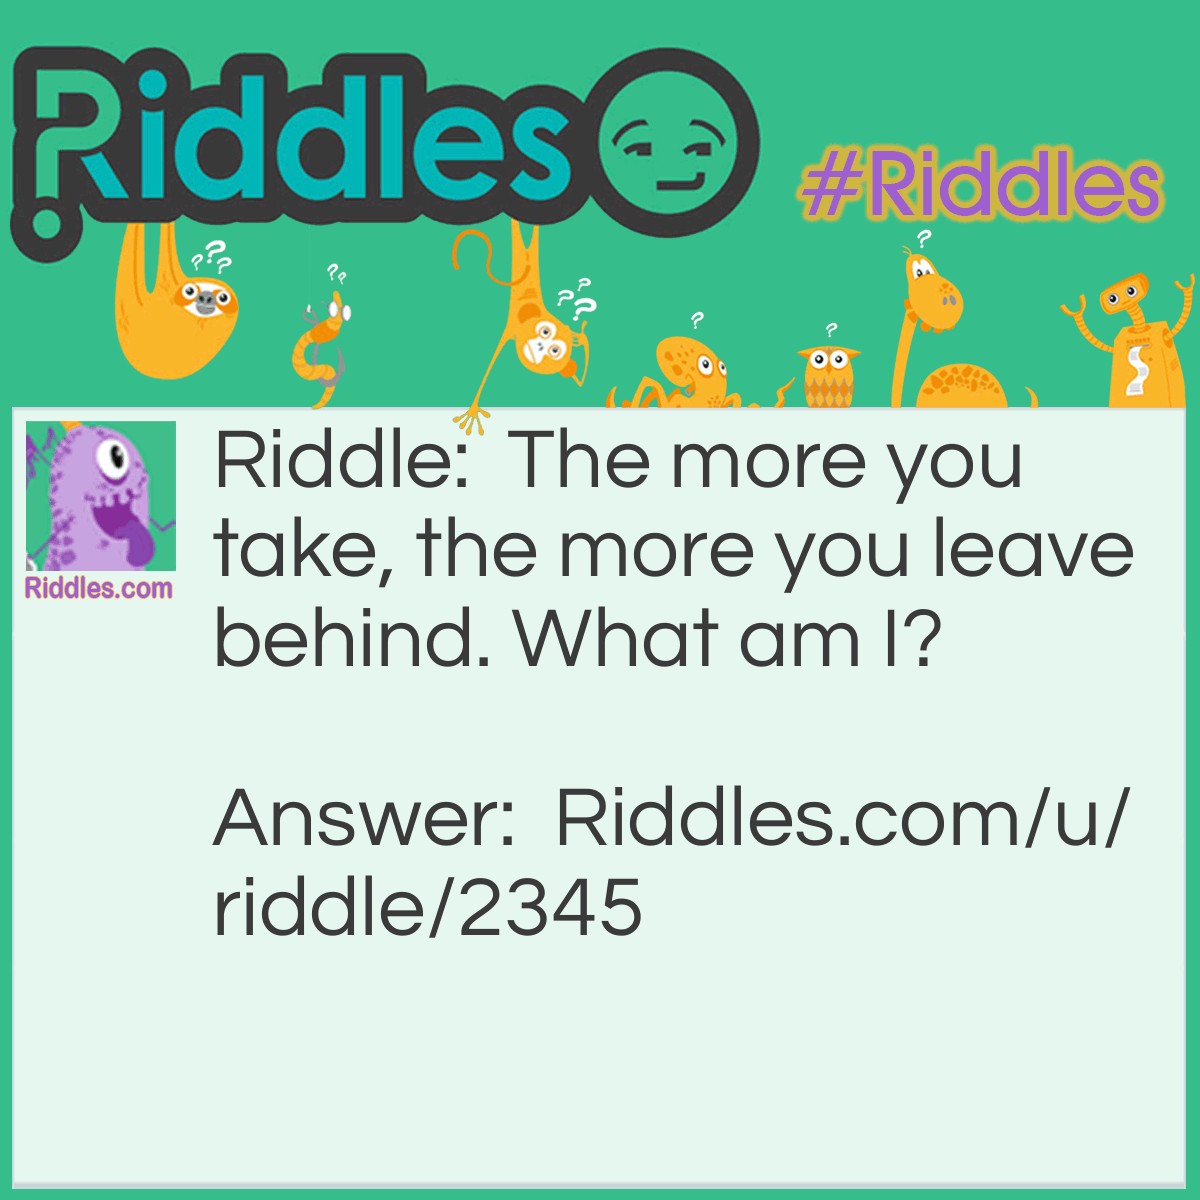 Riddle: The more you take, the more you leave behind. "<a href="../../../what-am-i">What am I?</a>" Answer: Footsteps.